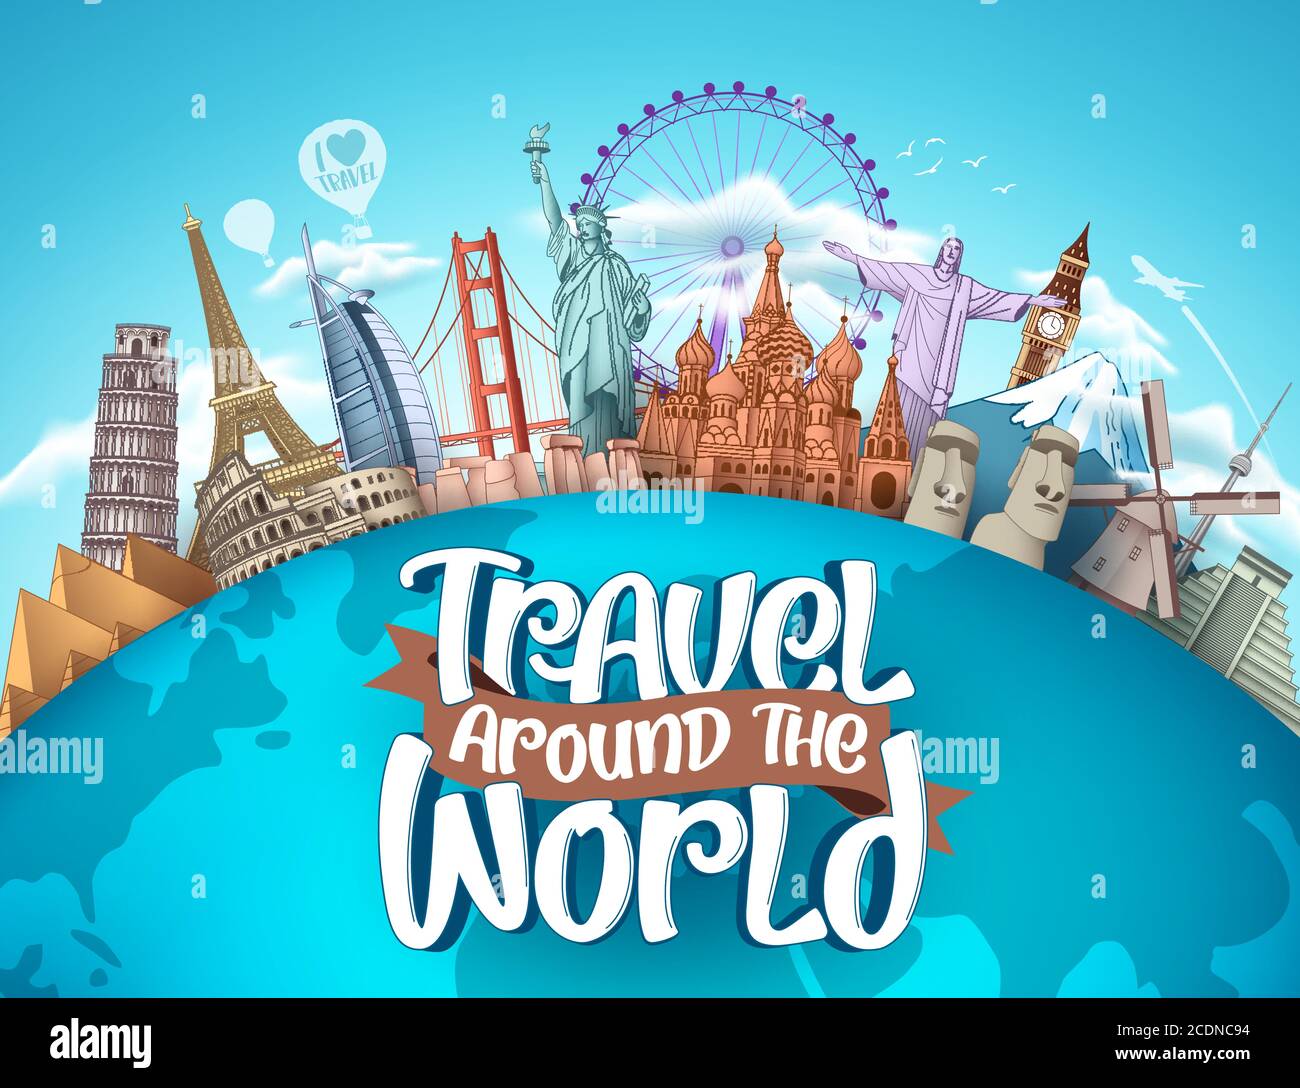 Travel around the world vector tourism design. Travel the world text, famous tourism landmarks and world attractions elements for holiday vacation Stock Vector